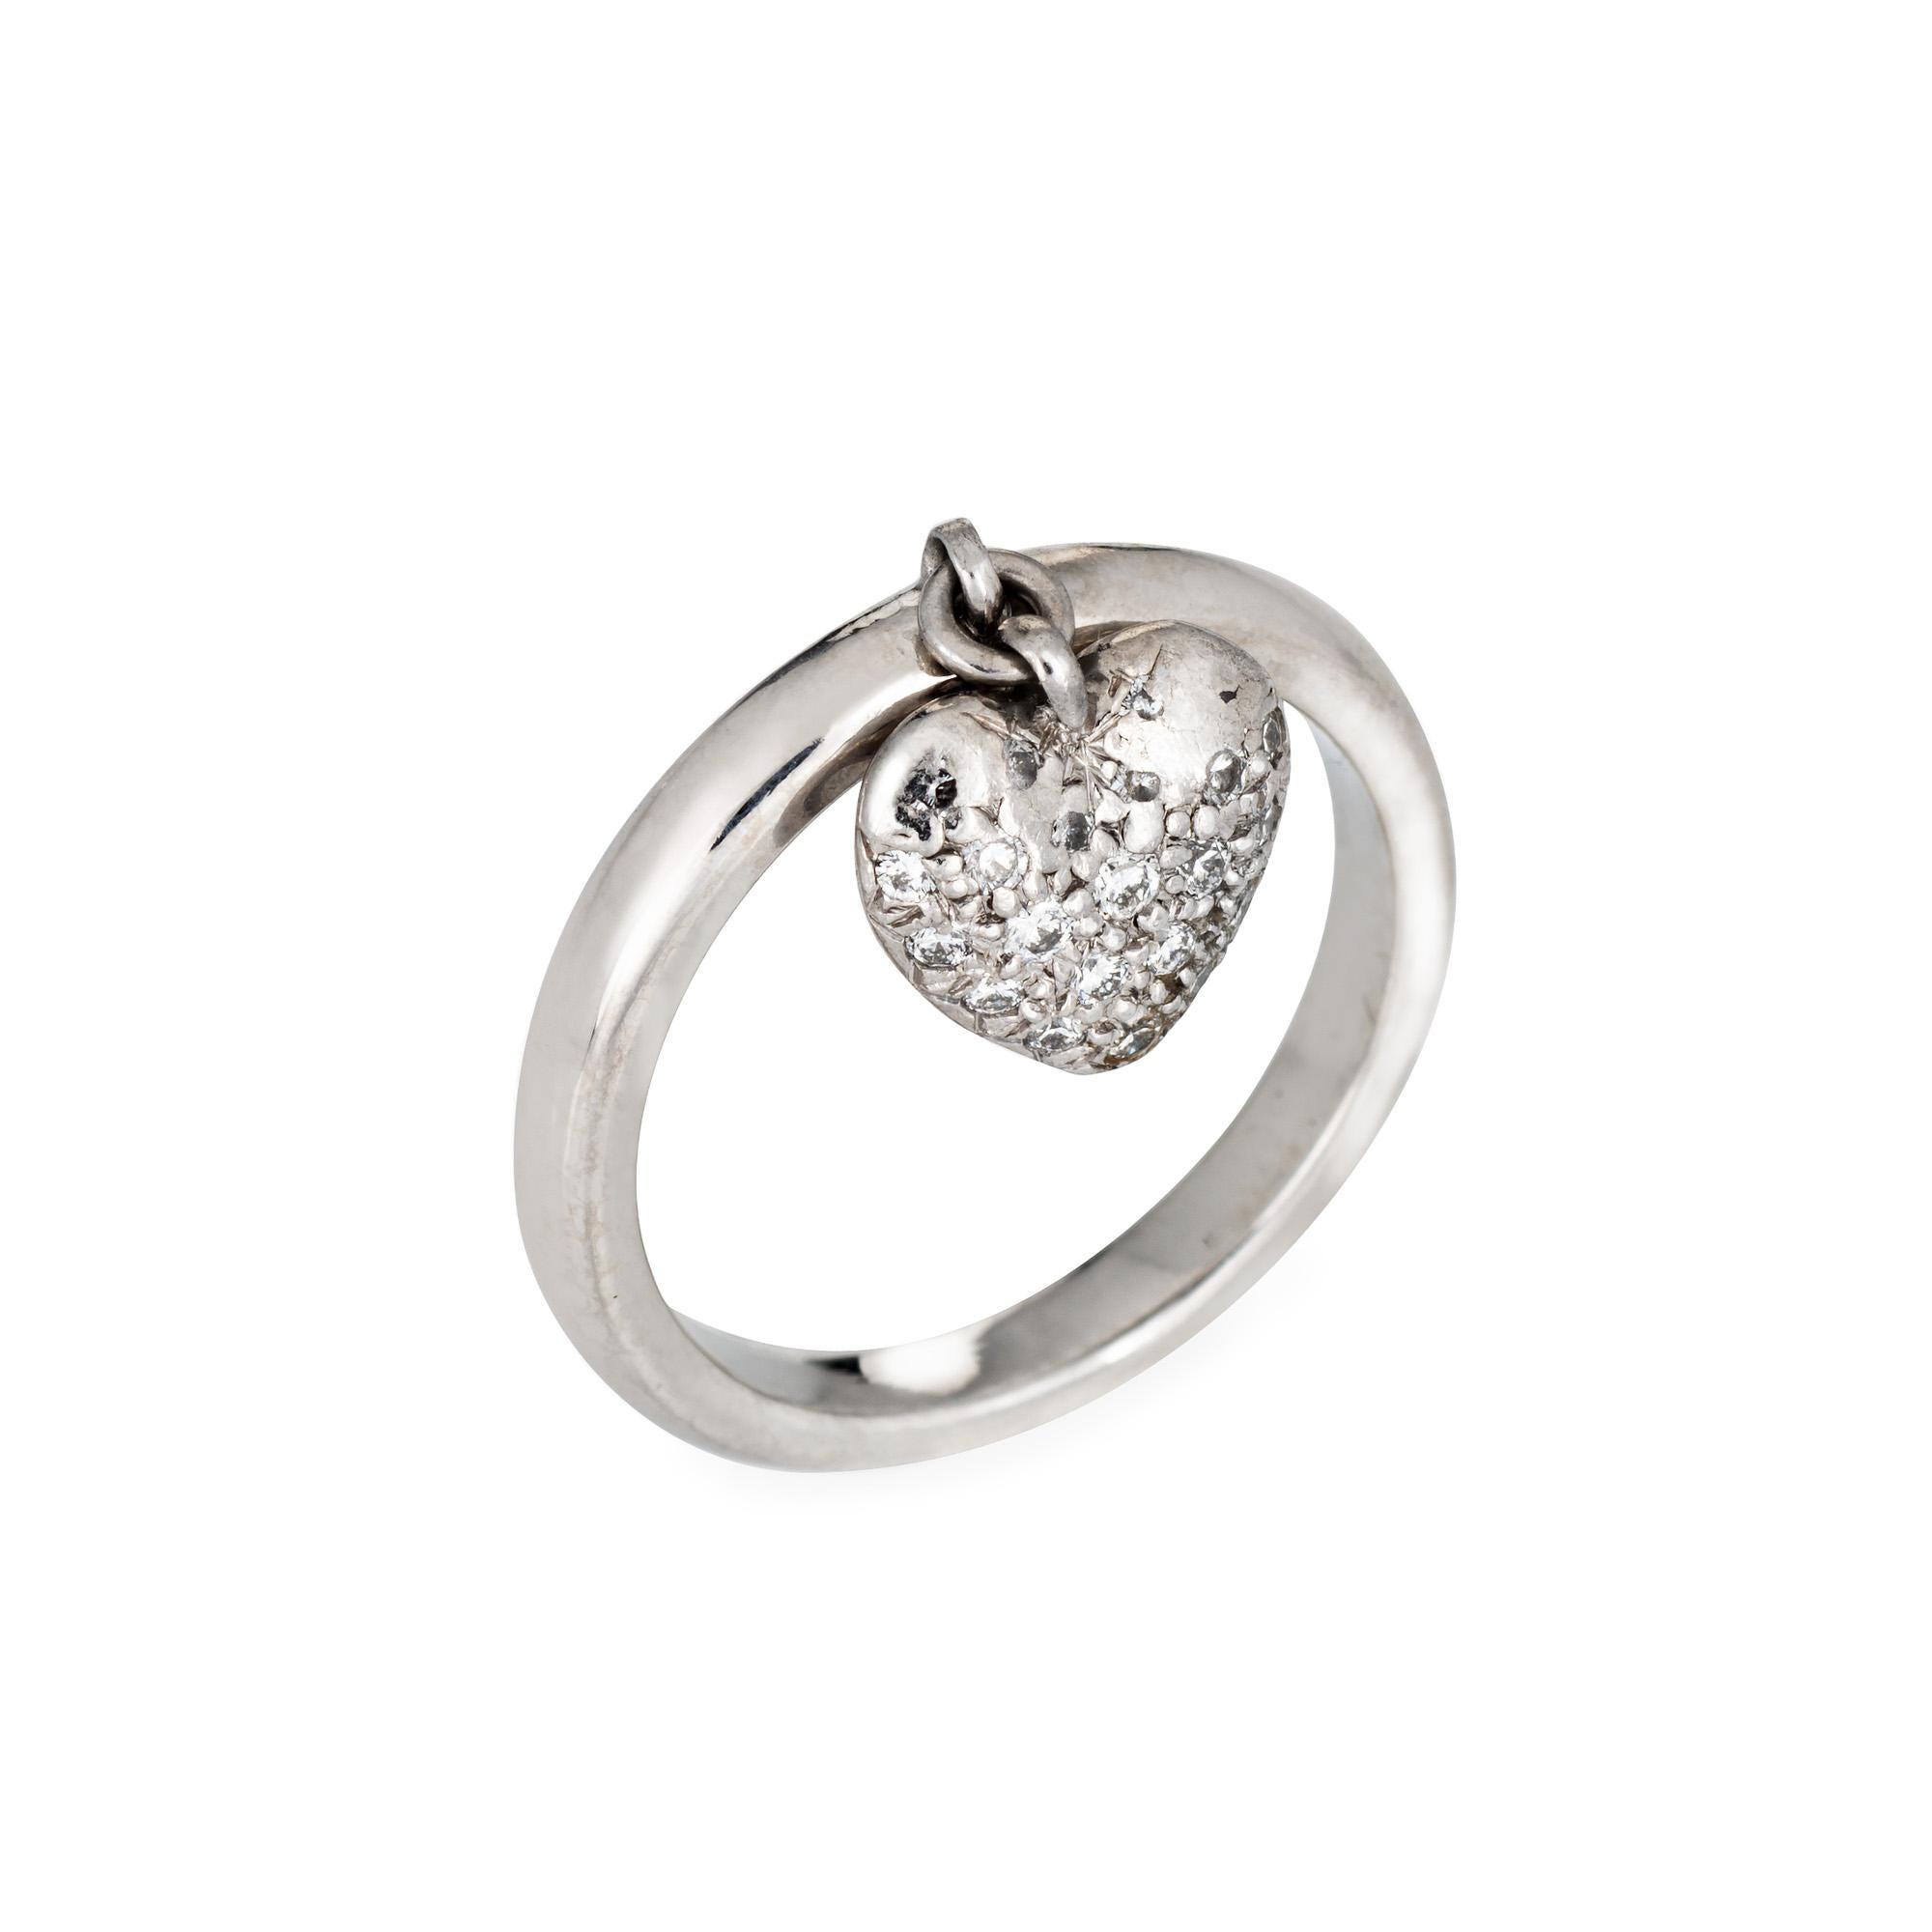 Finely detailed pre owned Tiffany & Co pave diamond heart charm ring crafted in platinum. 

Diamonds are pave set into the heart and total an estimated 0.15 carats (estimated at F-G color and VVS2 clarity). 

The stylish ring features a diamond set